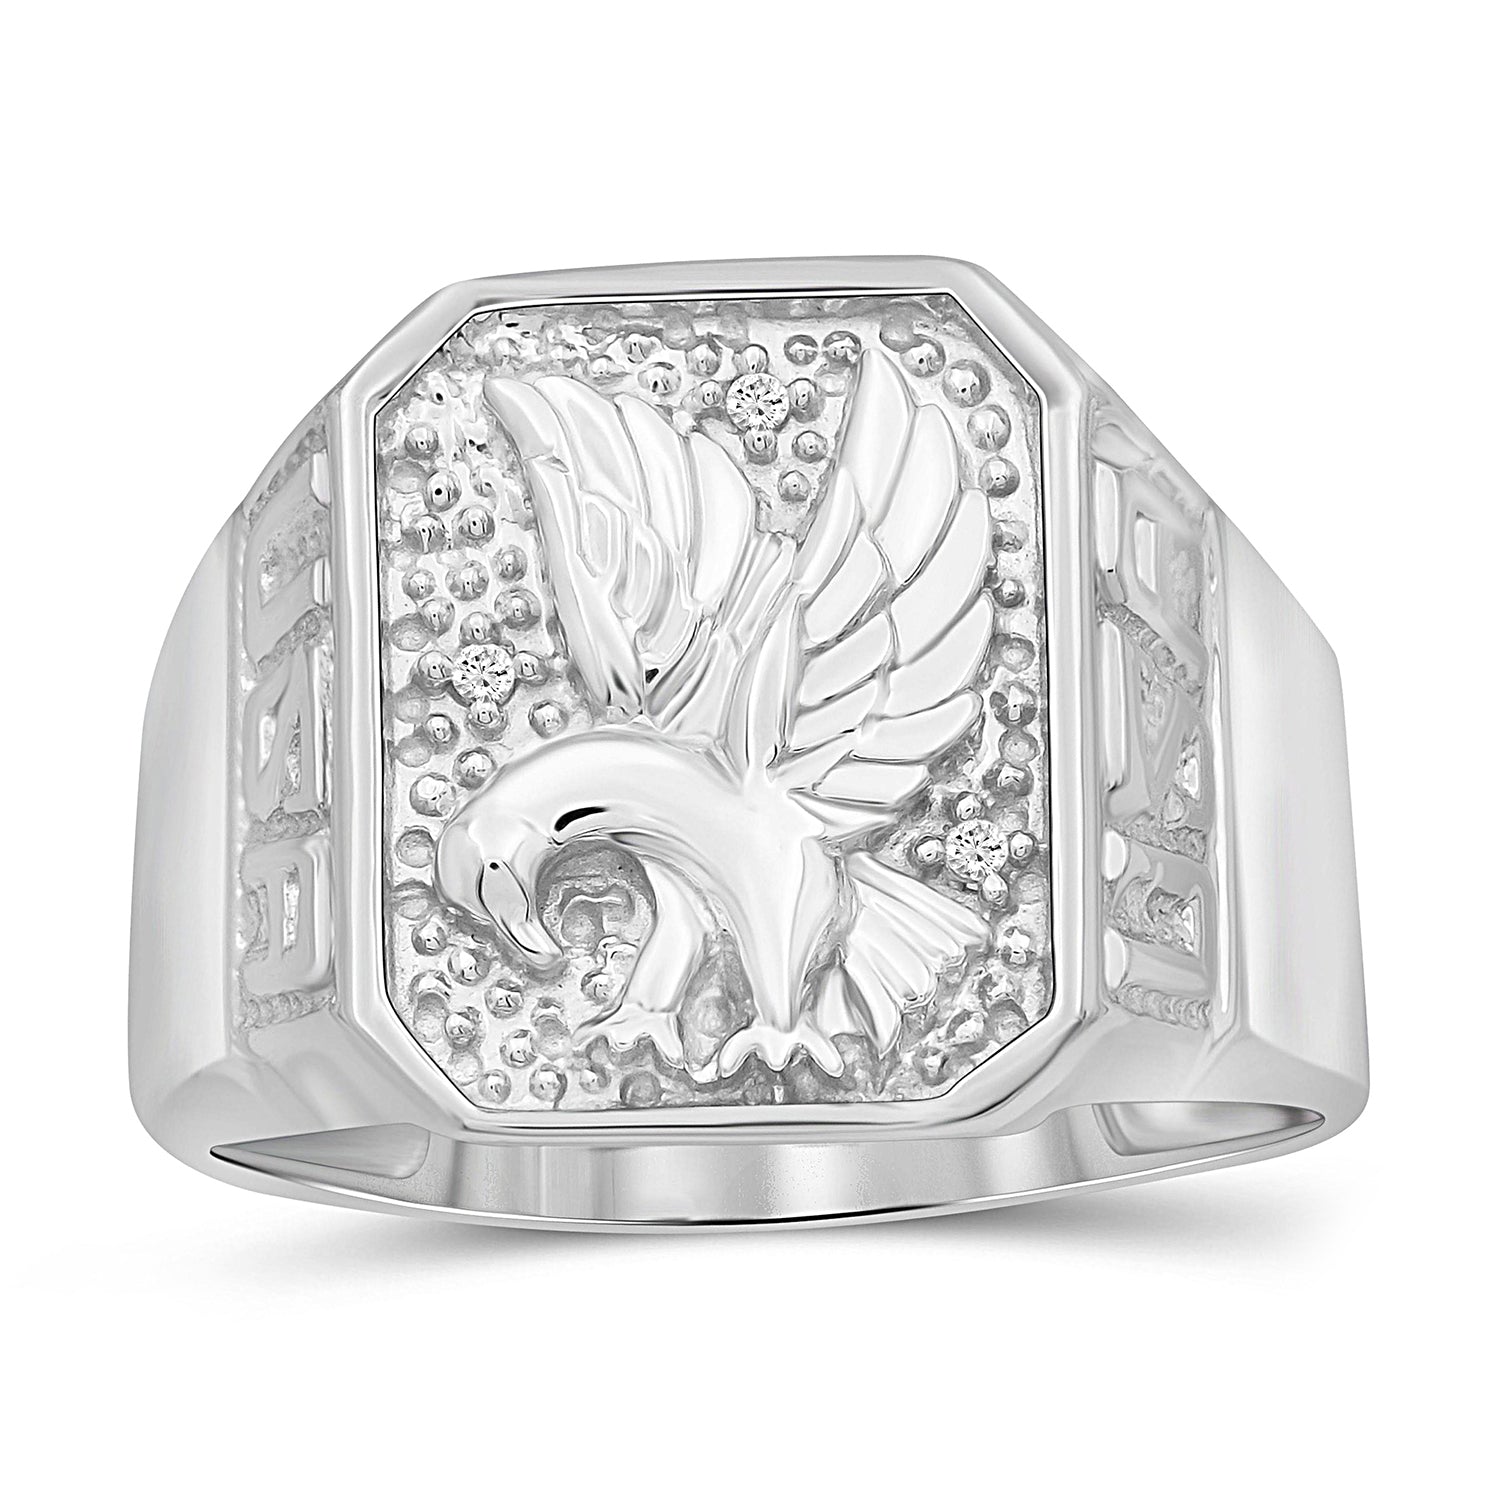 Mens Rings Eagle Rings for Men Silver – Genuine .925 Sterling Silver Dad Rings for Men with   White Diamond Accents – Handsome, Durably Crafted Dads Ring Gifts for Men and Gifts for Dad